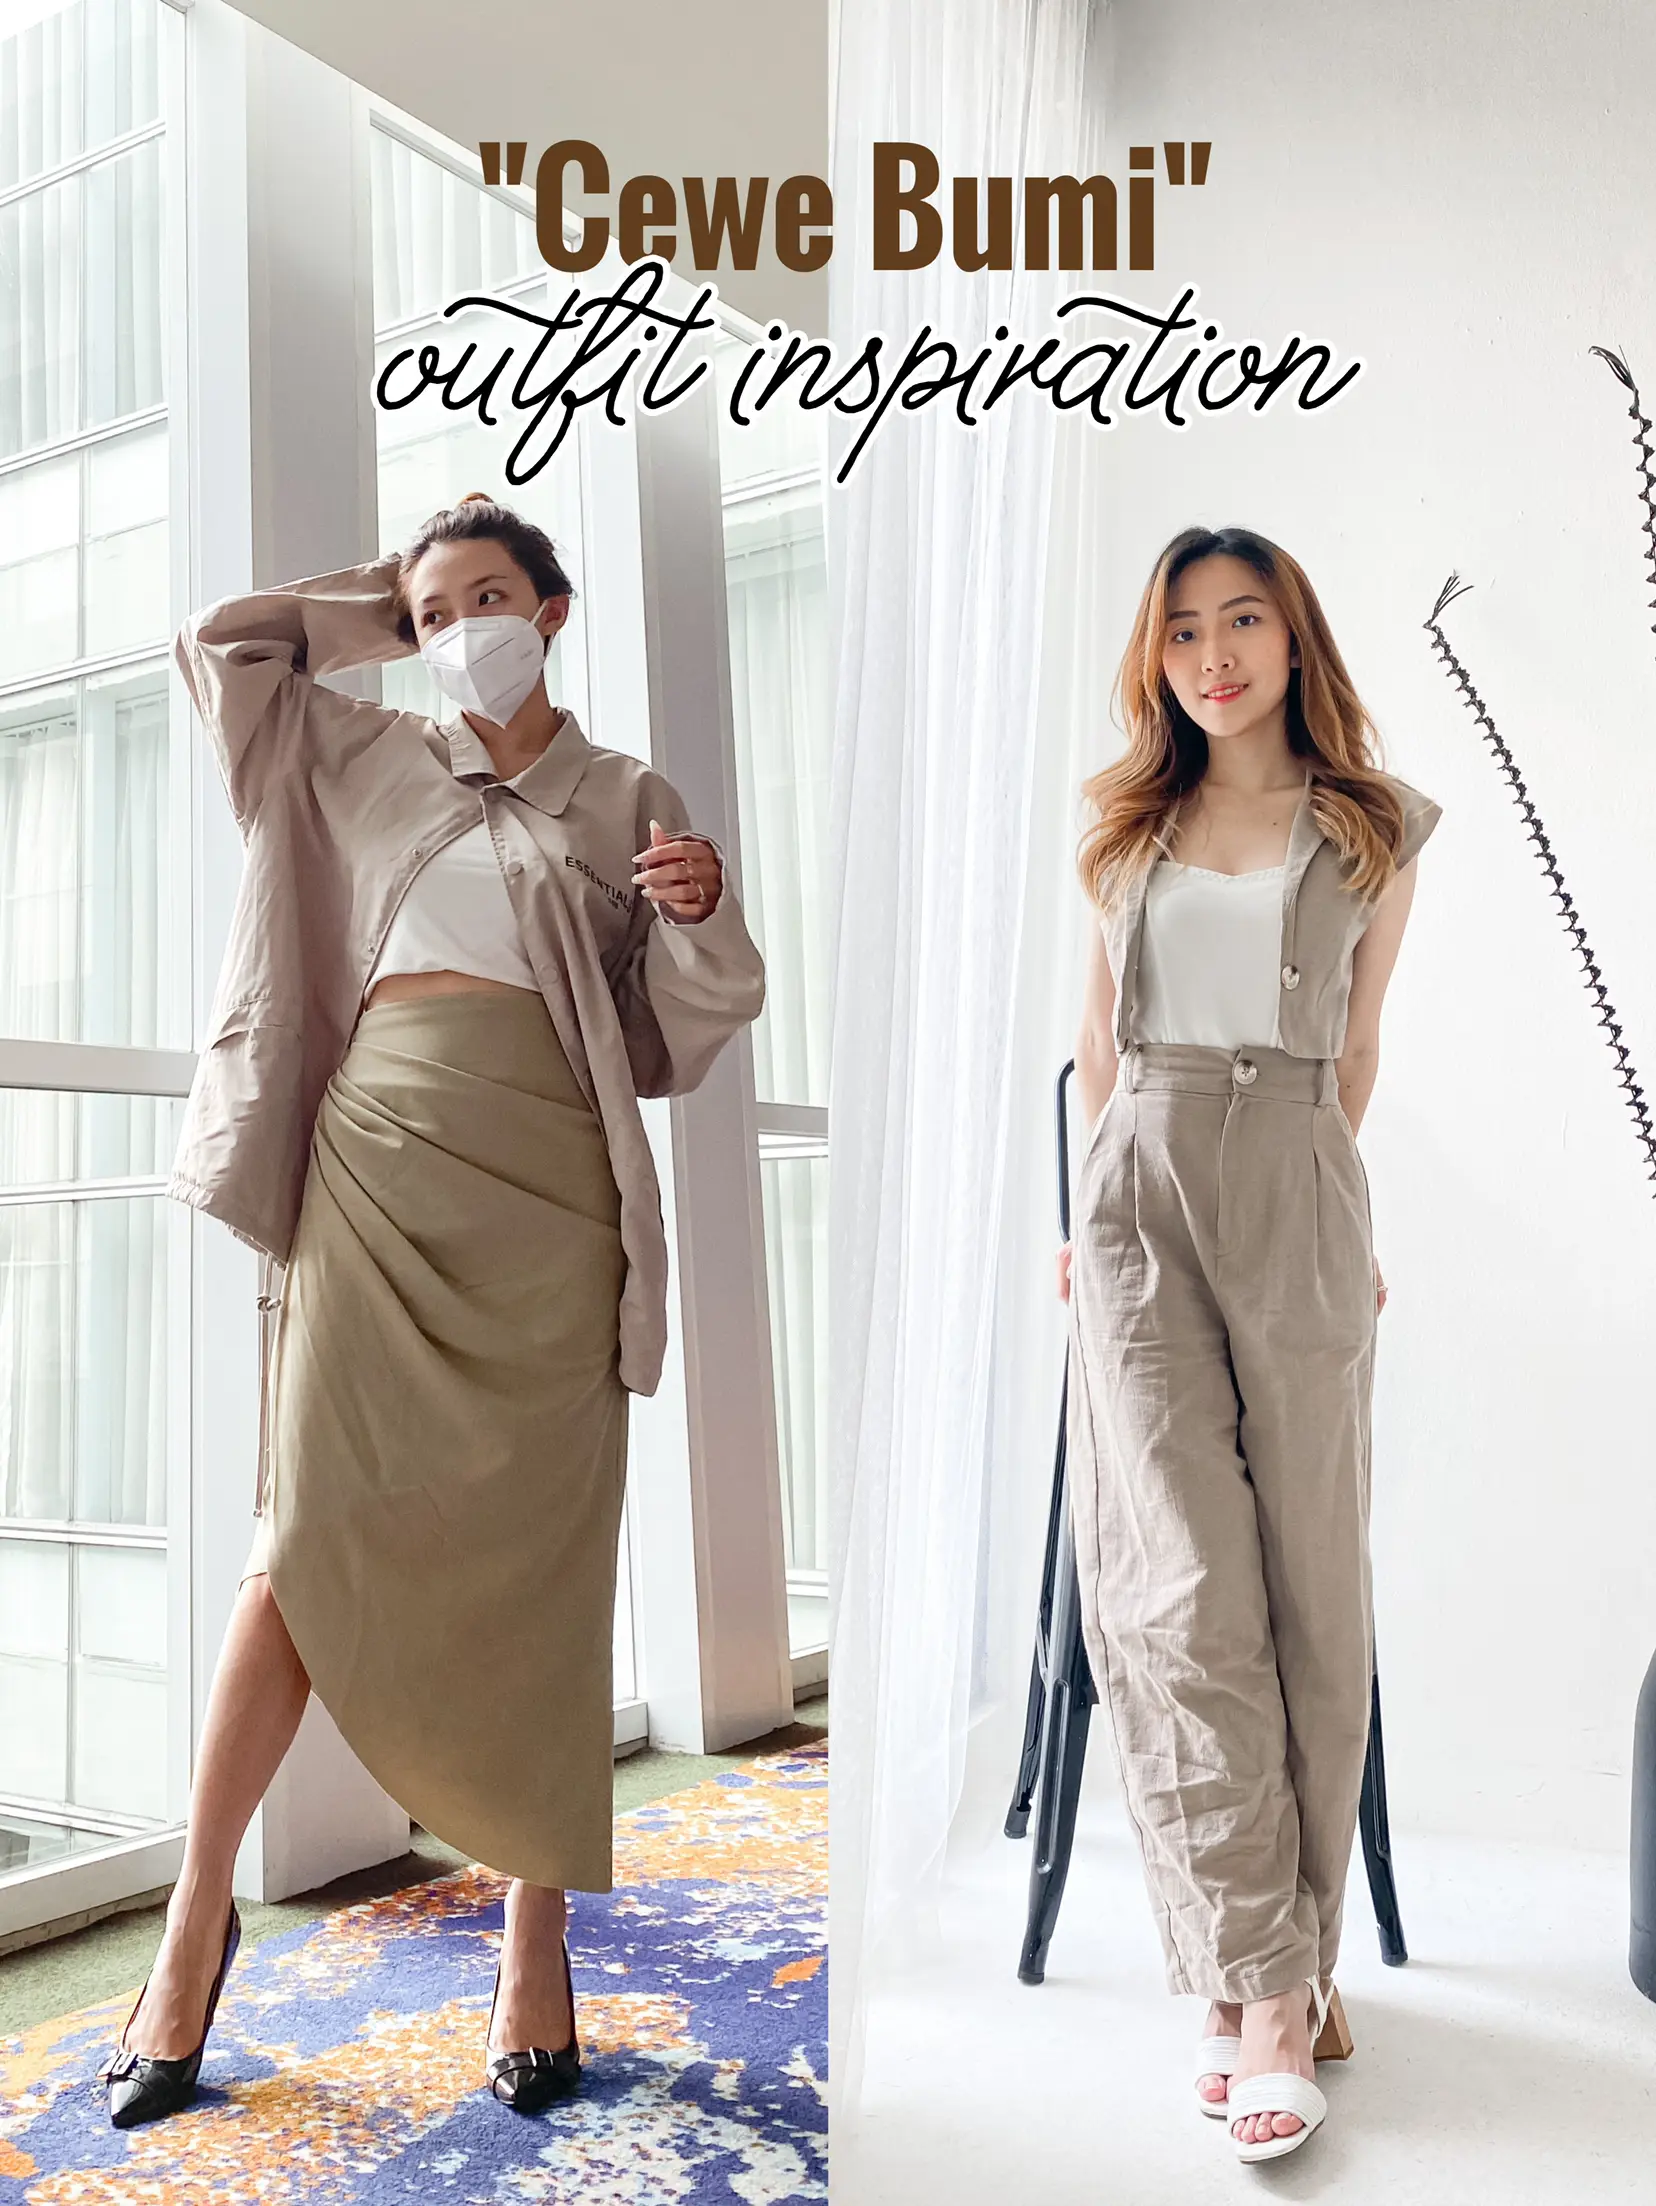 Cewe bumi Outfit inspiration 🌍 | Gallery posted by I've | Lemon8